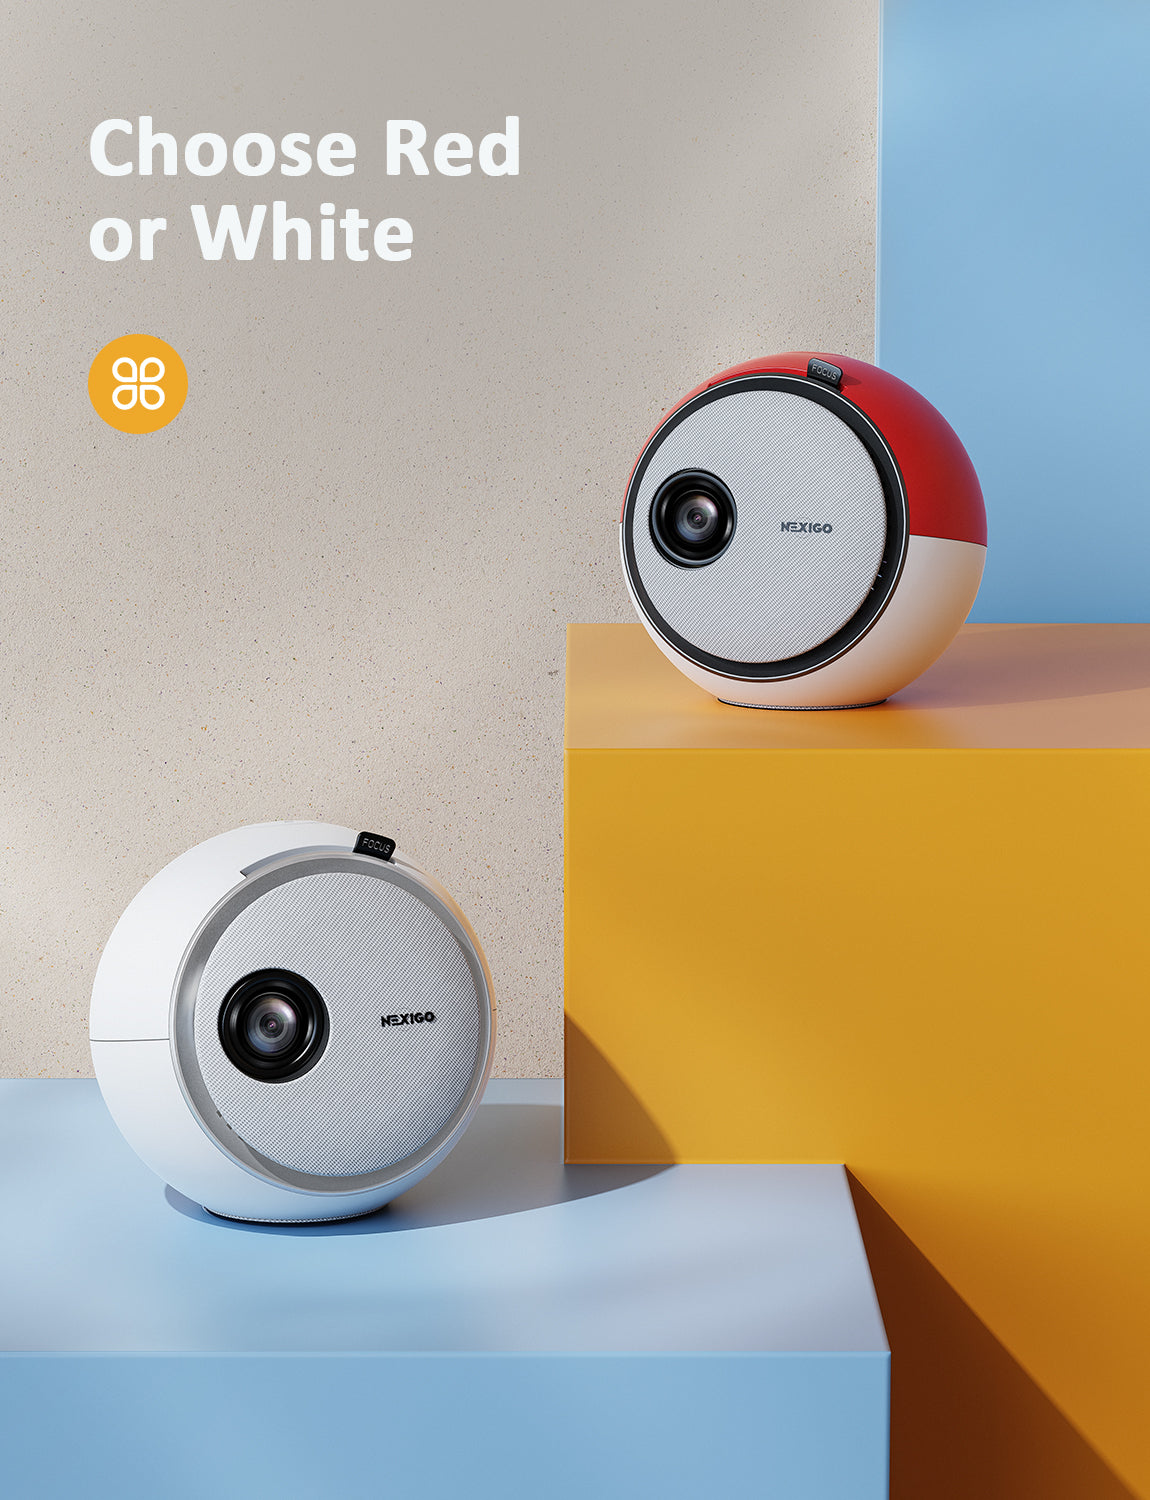 There is a choice between a white and a red projector to match your preference.